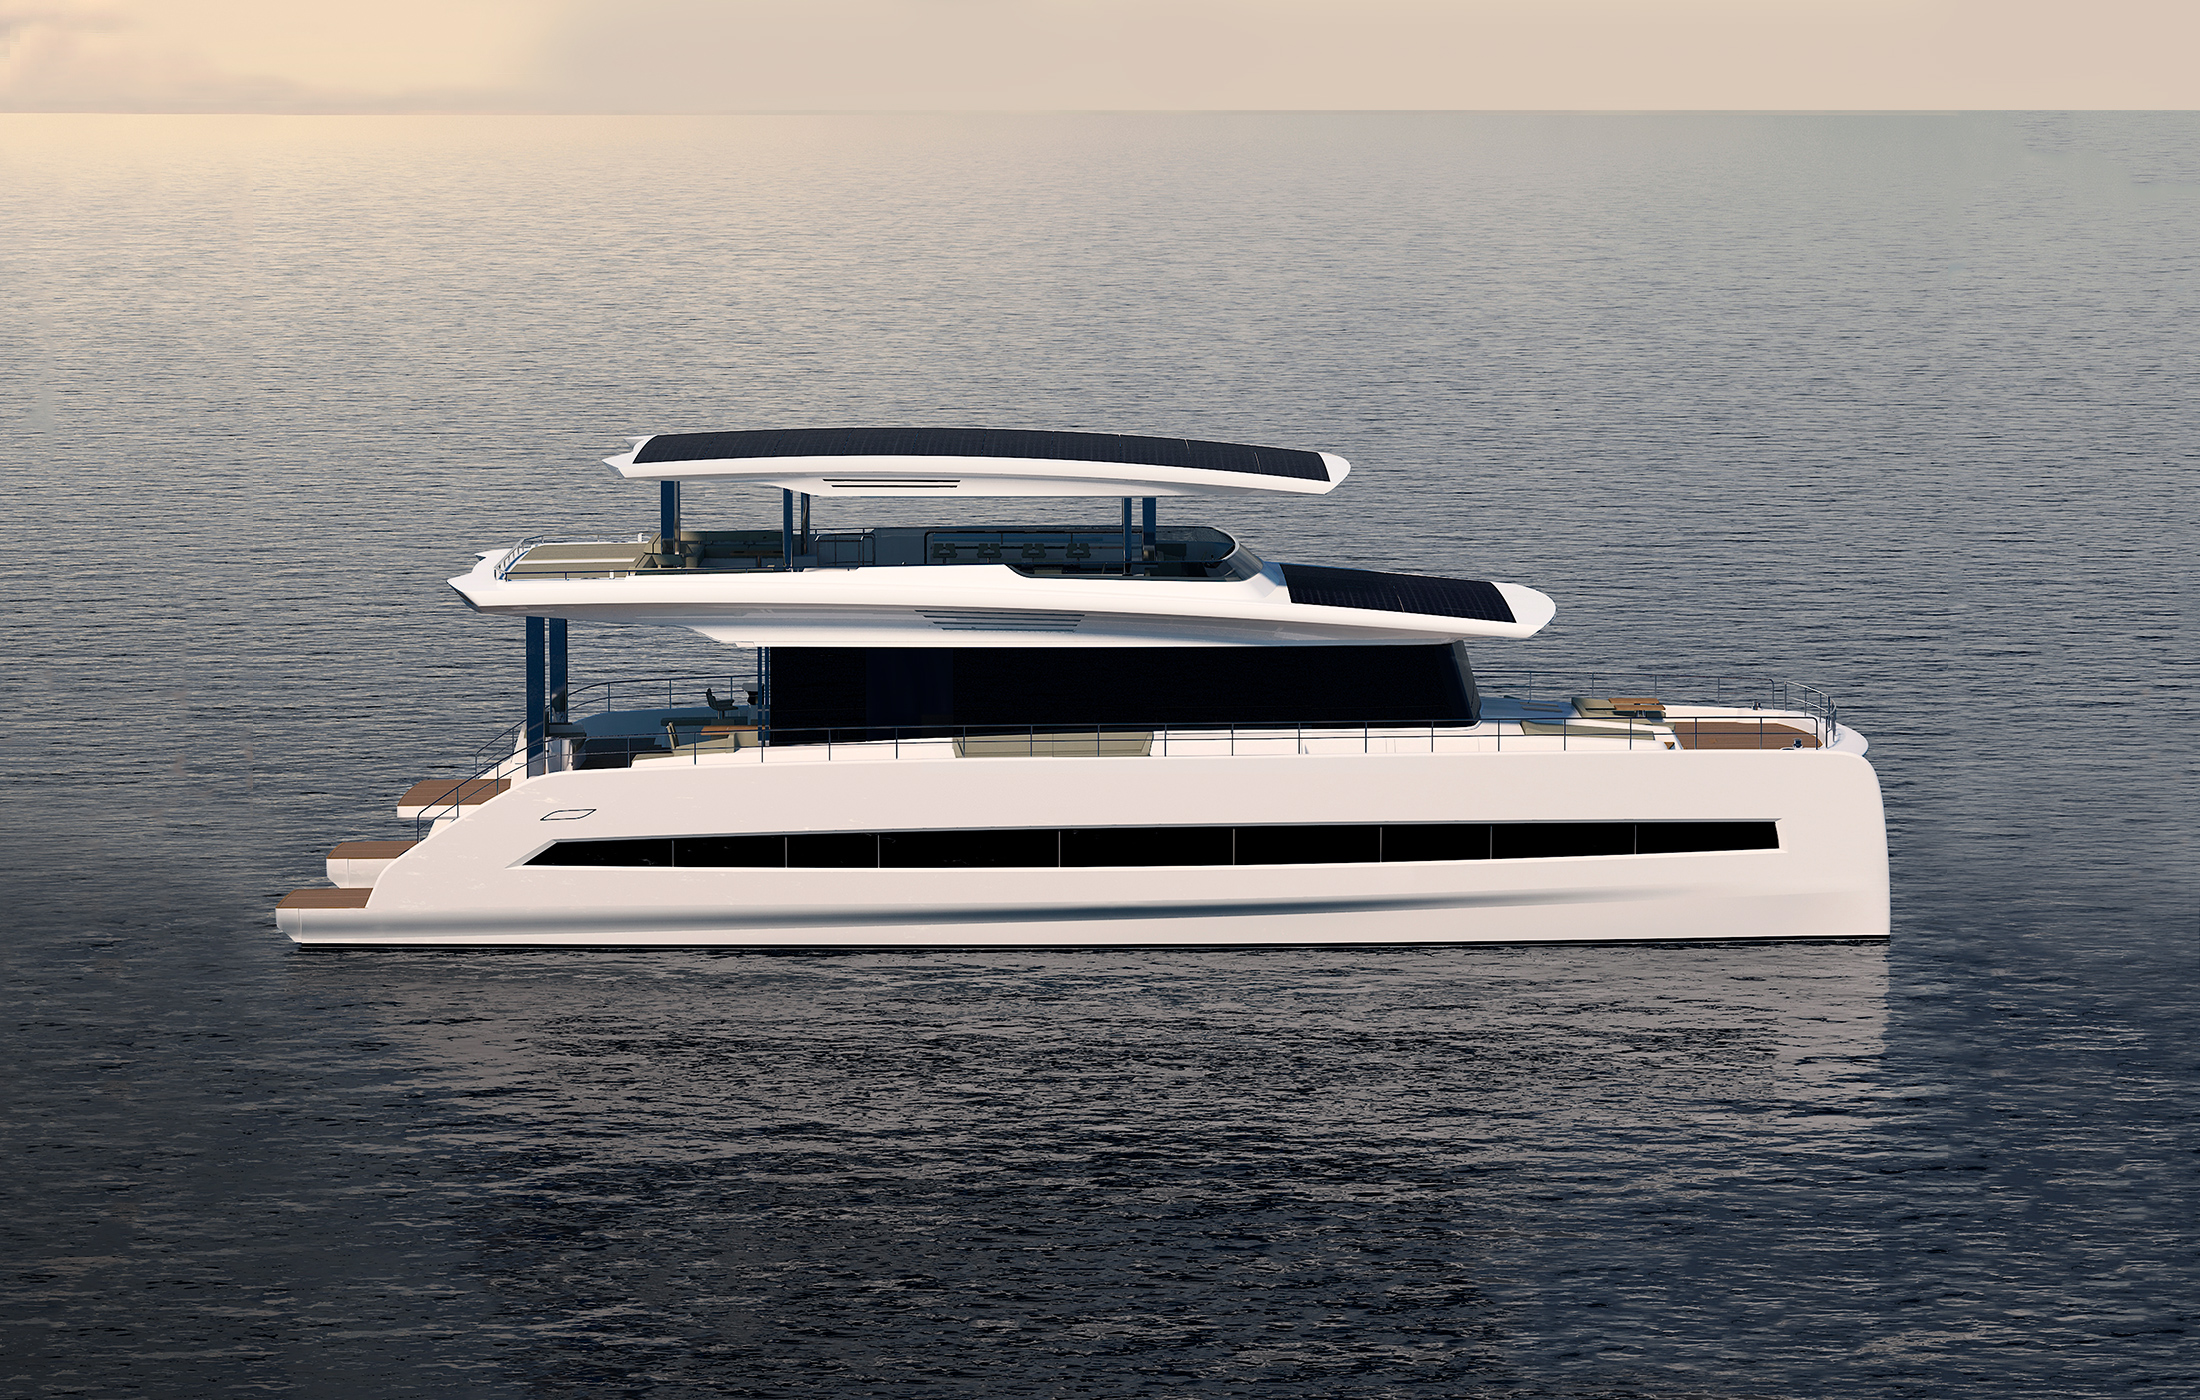 80 feet yacht with solar panels on the roof